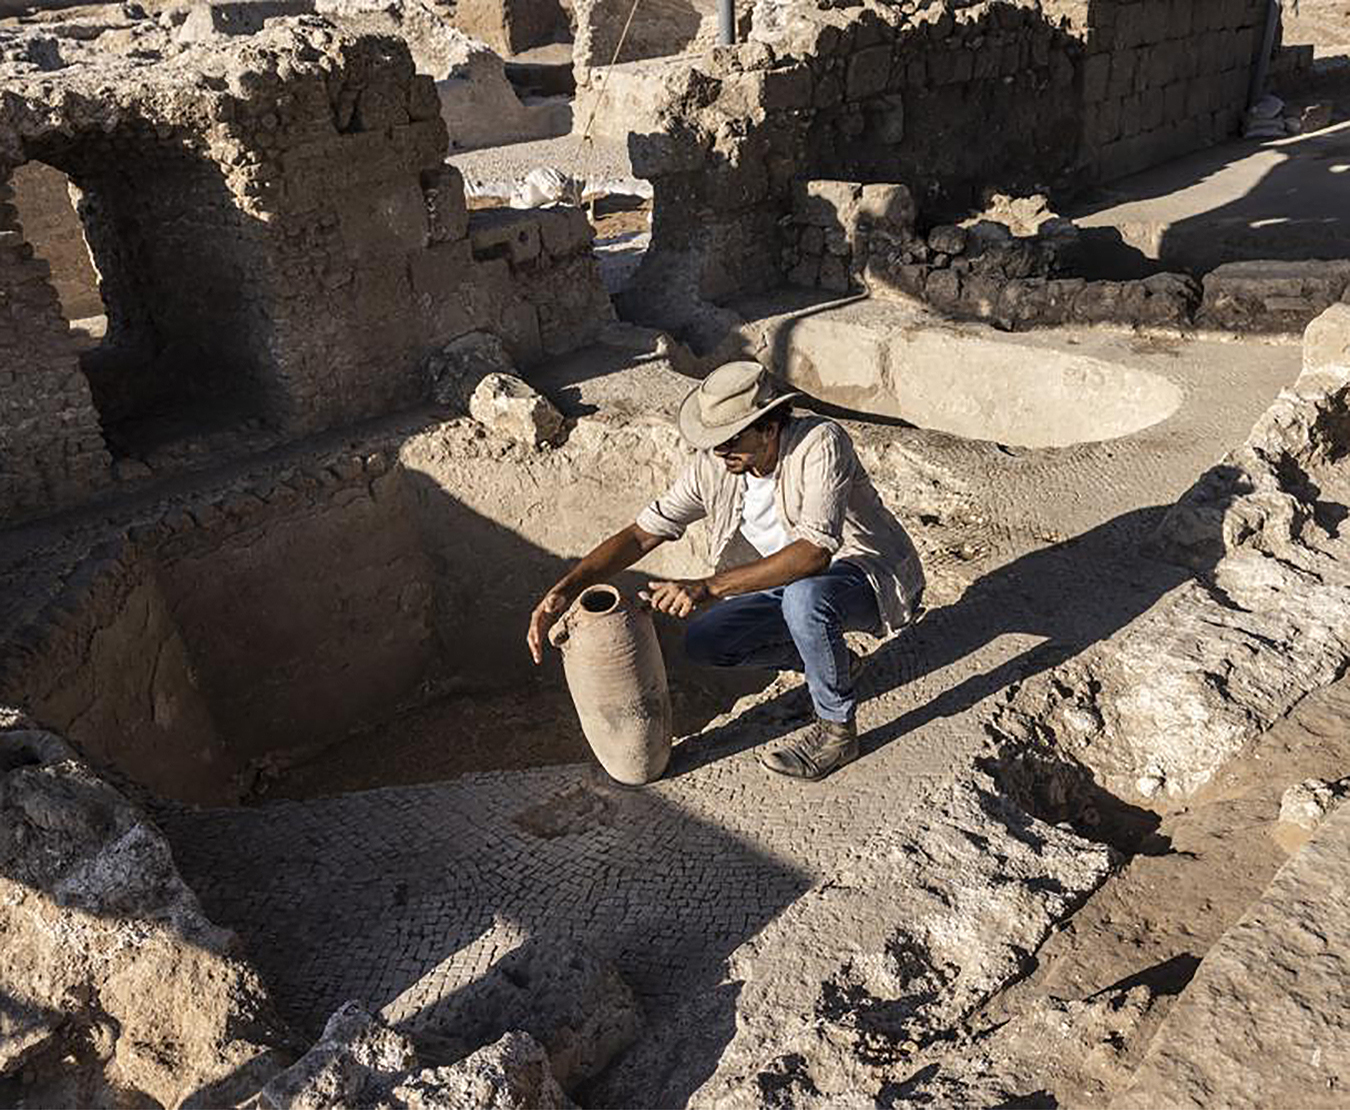 Avshalom Davidesko, from the Israel's Antiquities Authority, examines a jar in a massive ancient winemaking complex dating back some 1,500 years in Yavne, south of Tel Aviv, Israel. Tsafrir Abayov/AP